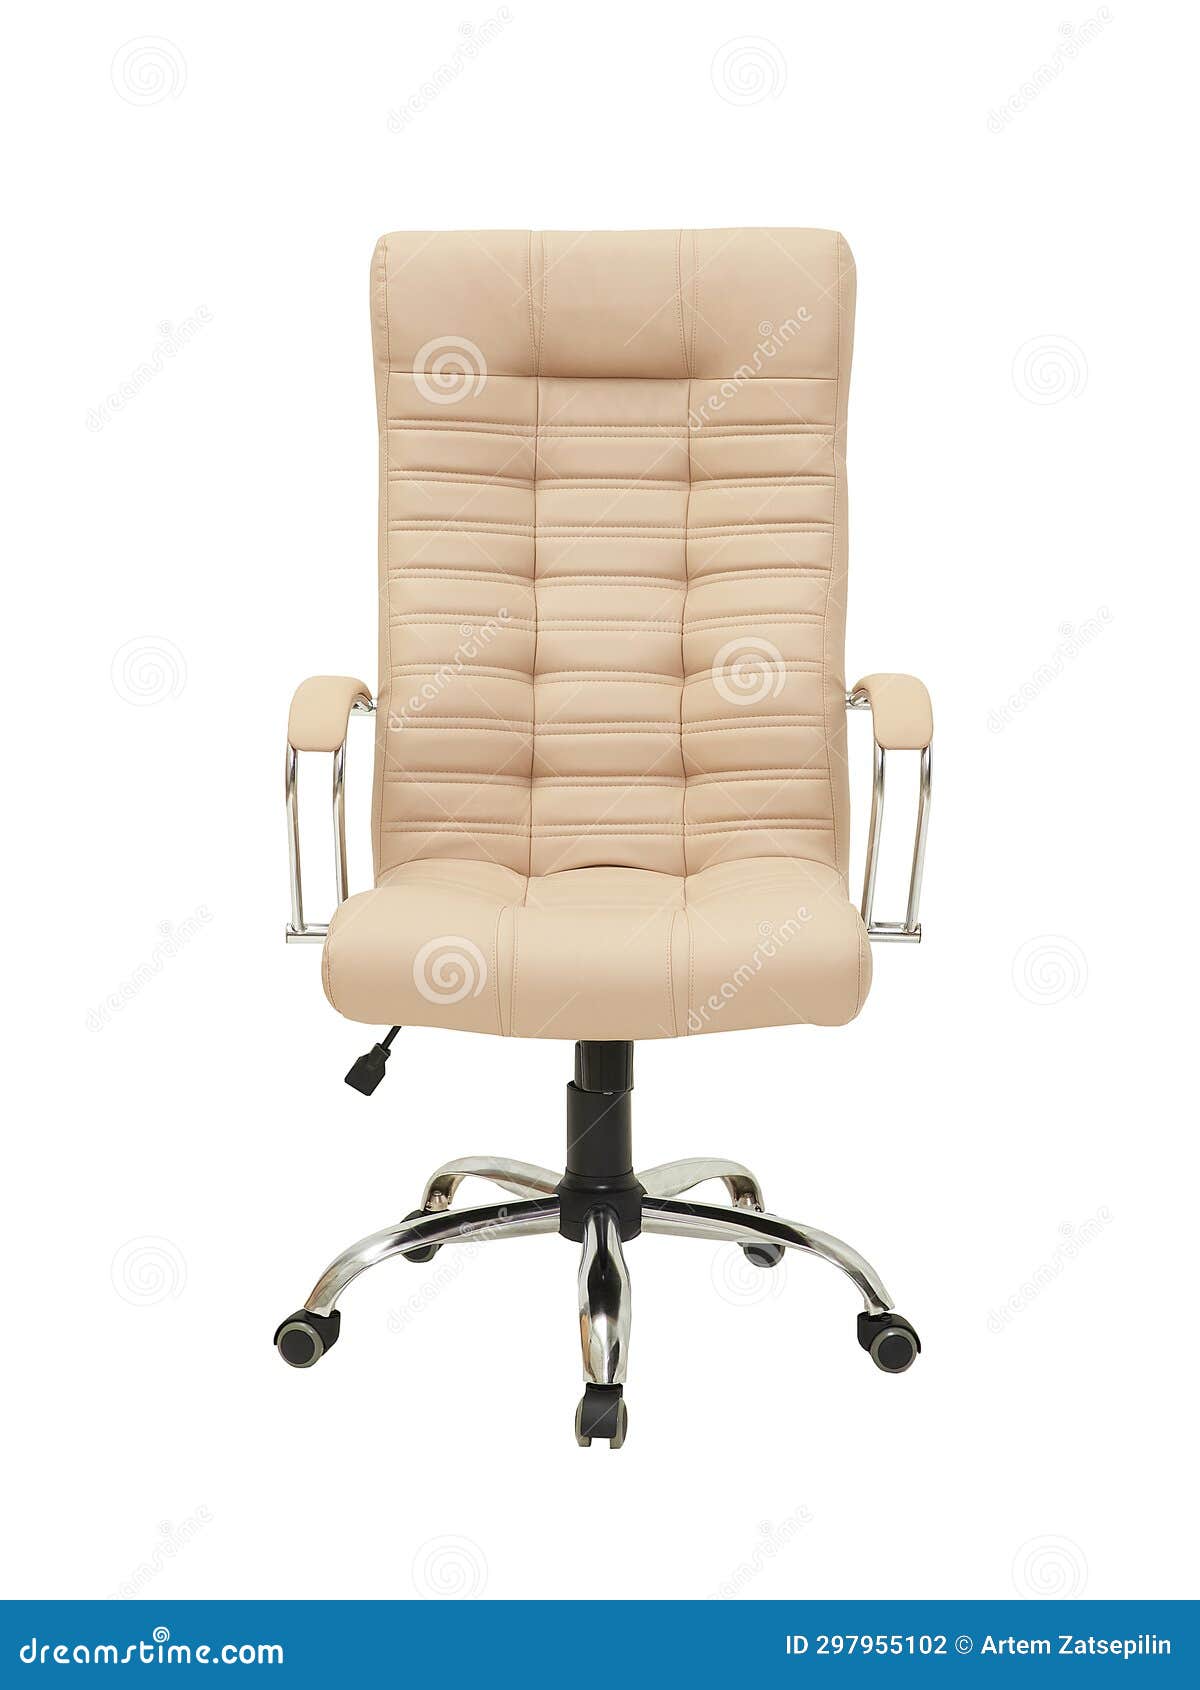 Beige Office Leather Armchair on Wheels Isolated on White Background ...